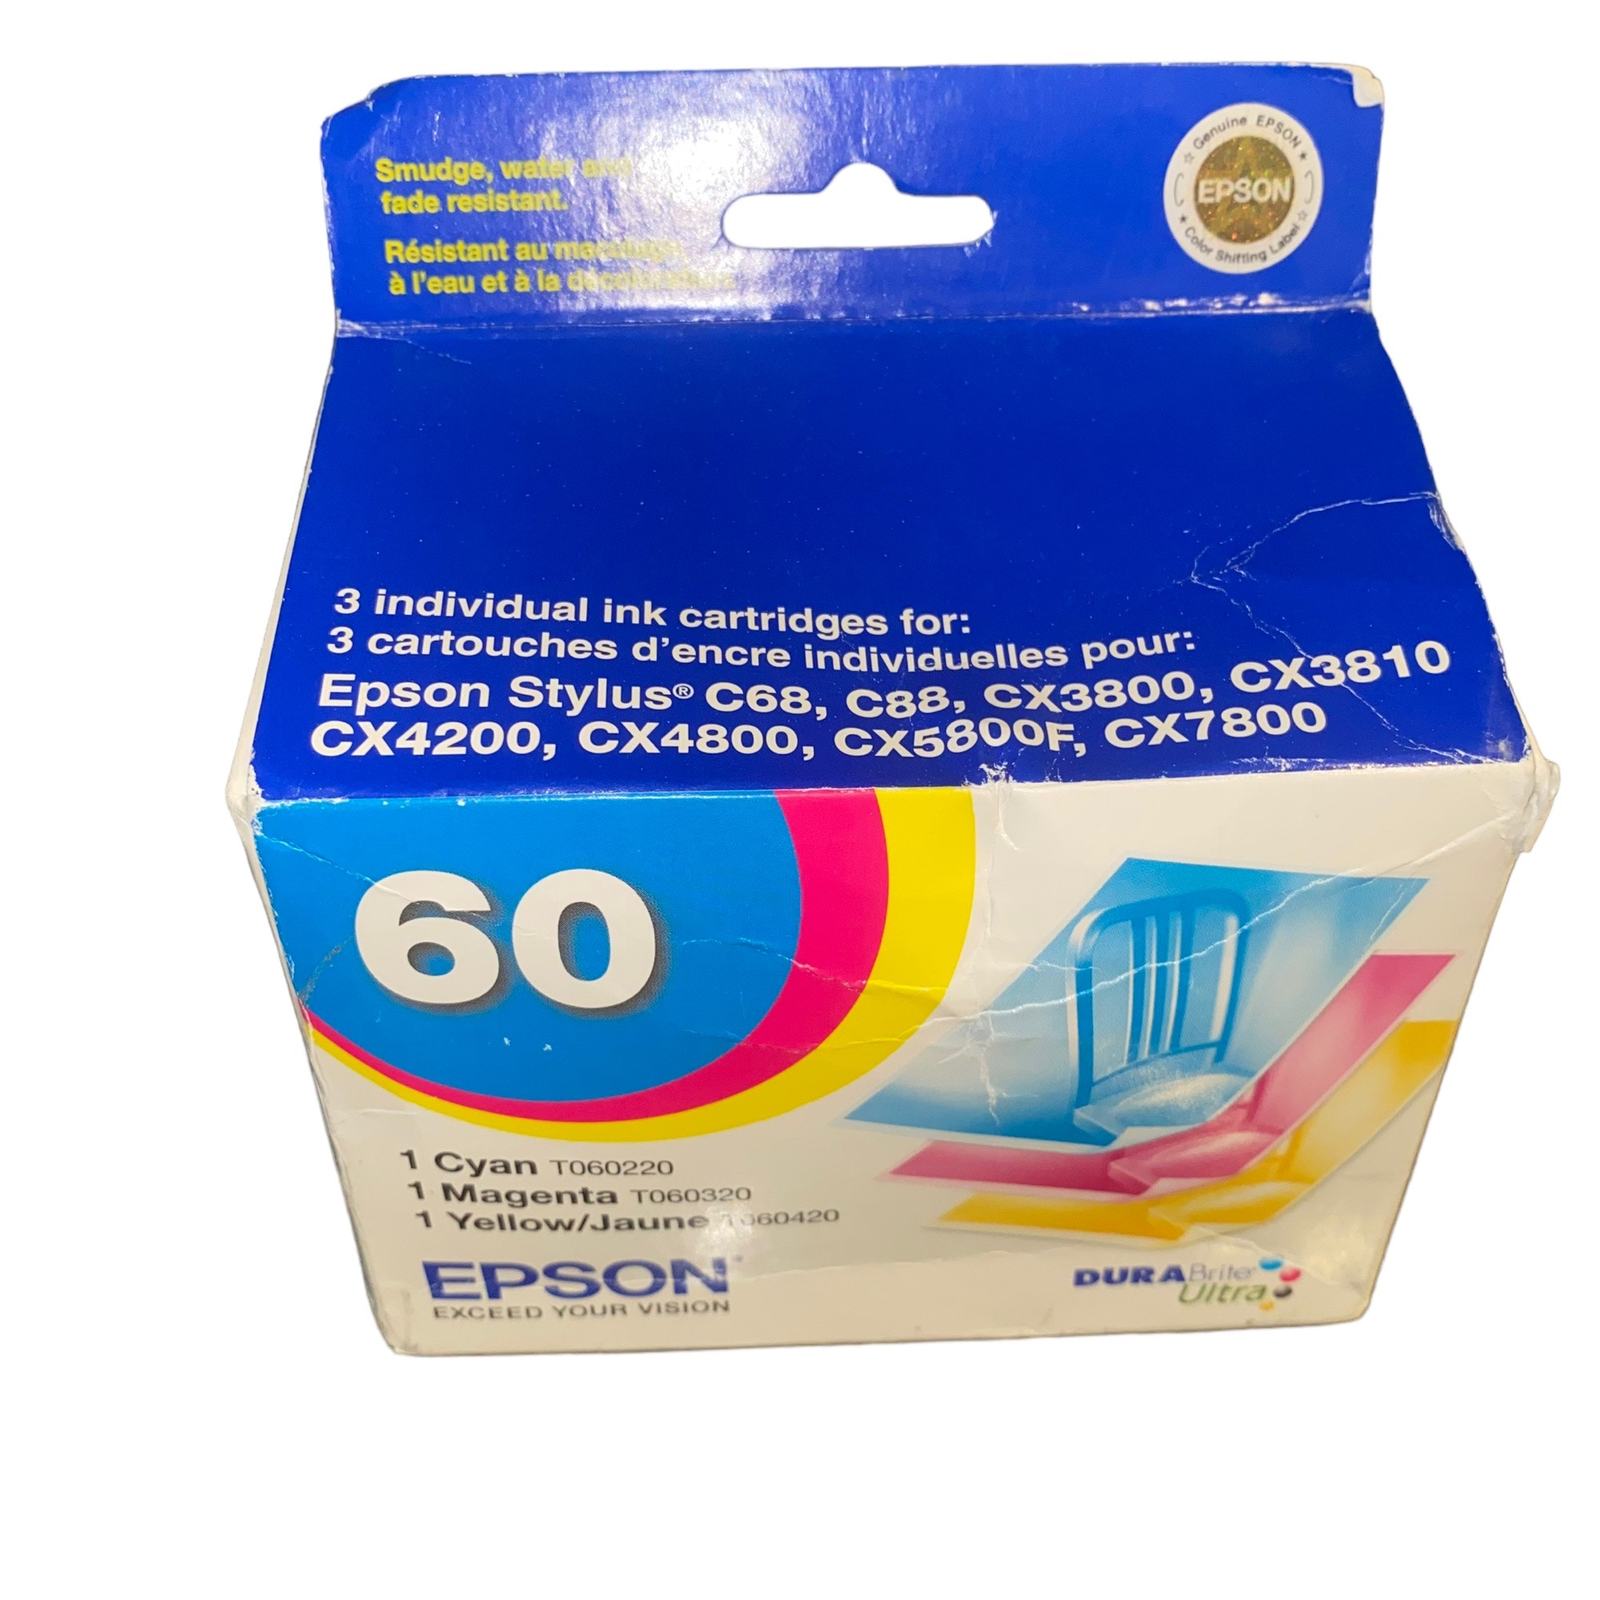 Epson Stylus Ink Cartridges 60 Pack of 3 Cyan Magenta Yellow Exp 10/2010 NEW - $15.35